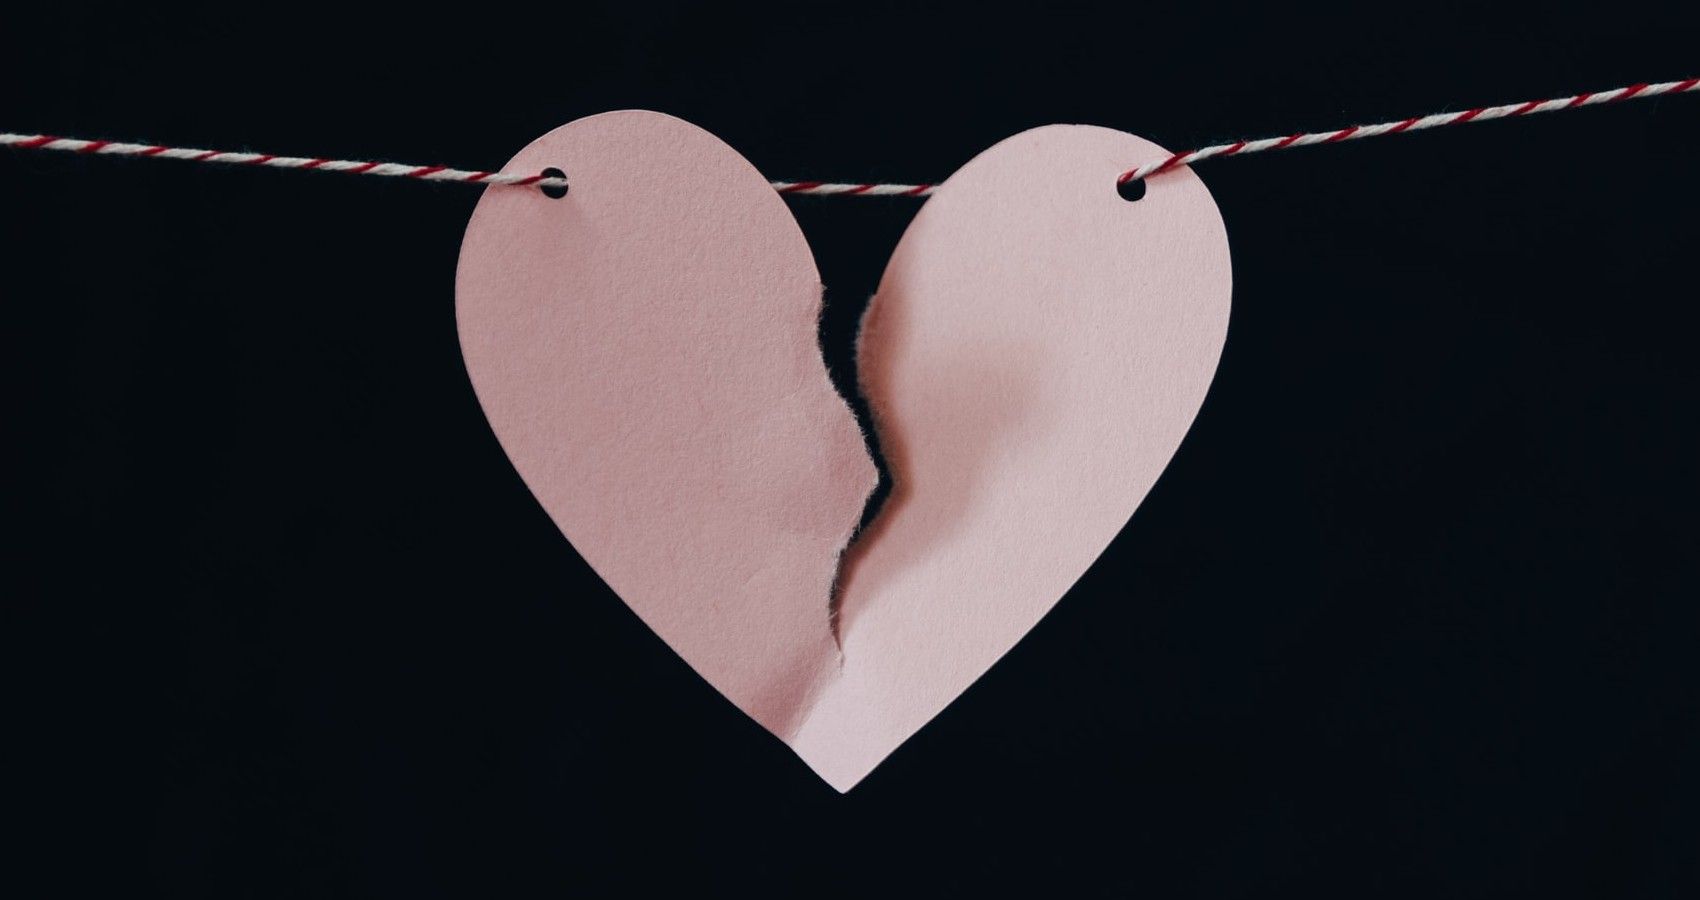 A paper heart that is hanging on a string and ripped